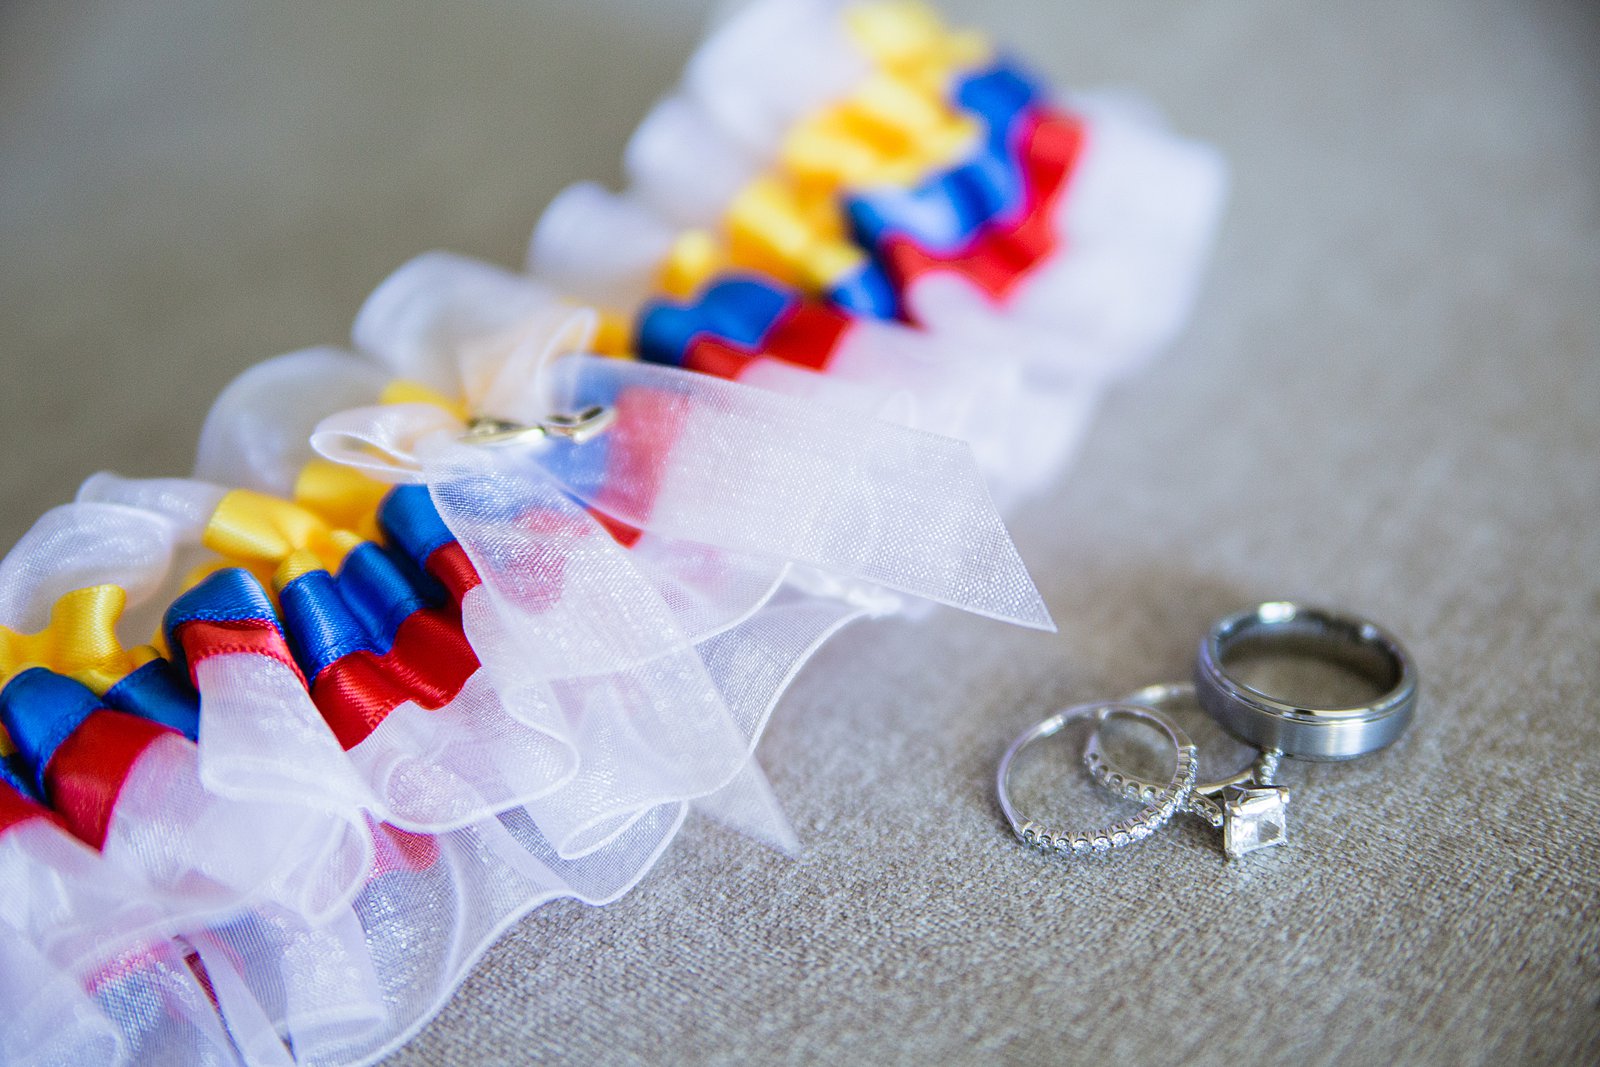 Bride and groom's wedding bands with wedding garter in the colors of the Columbian flag.